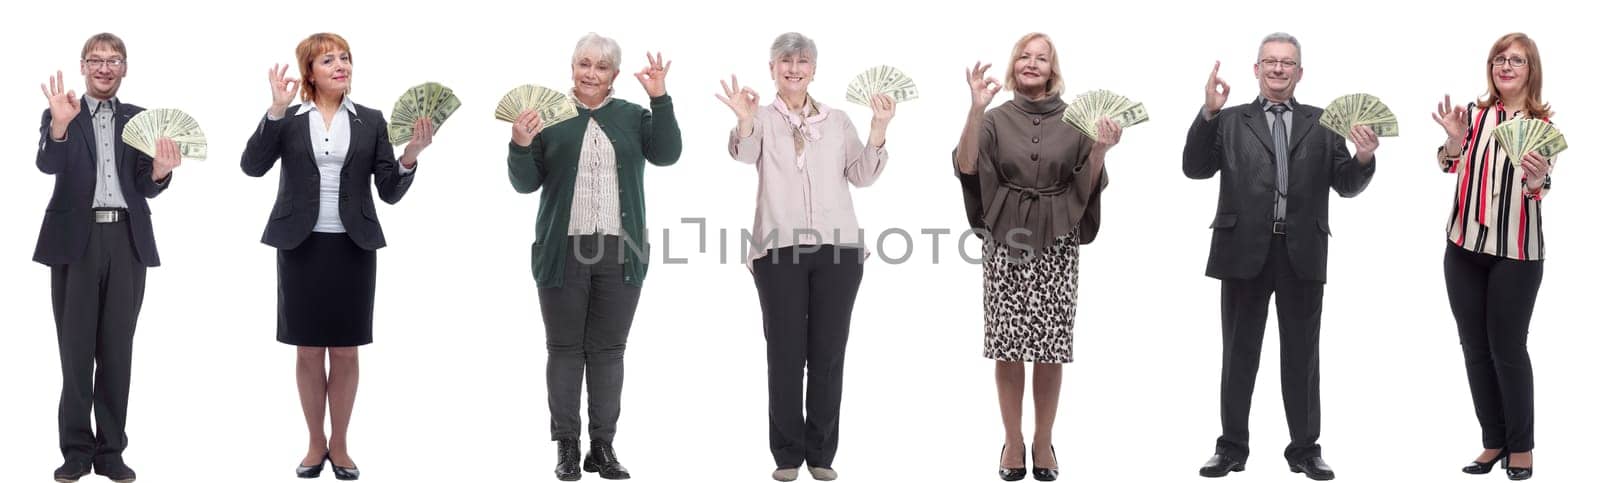 group of successful people holding money in hand isolated by asdf